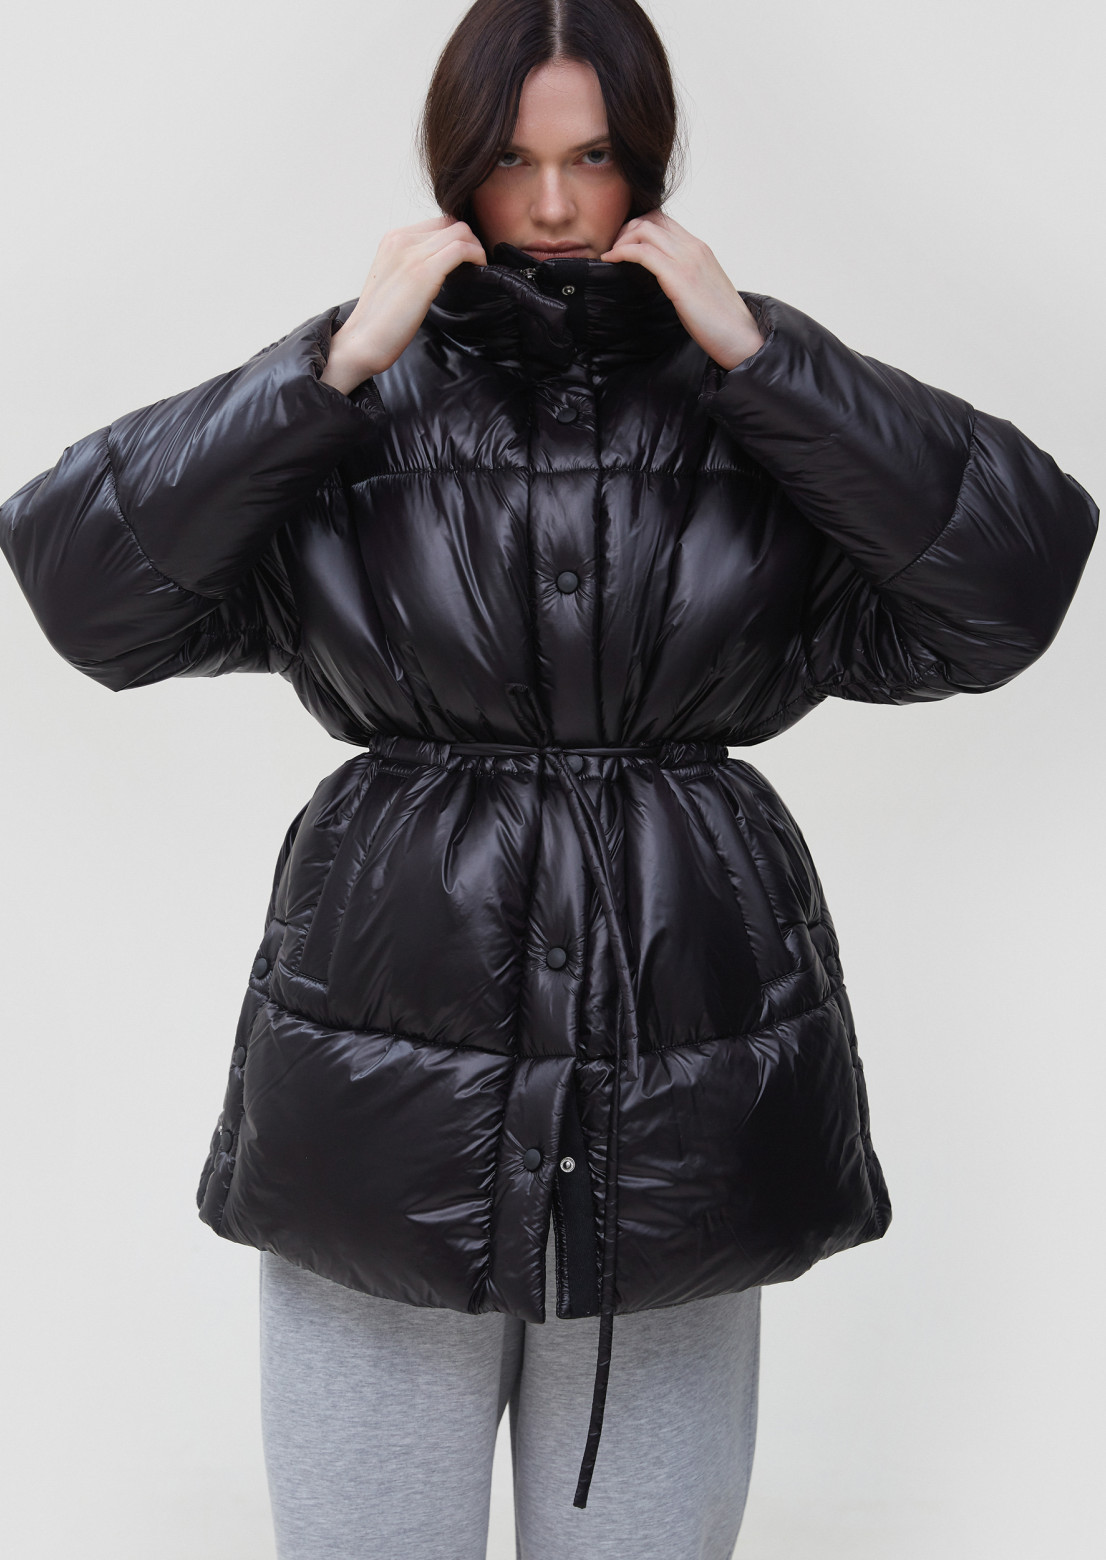 Black color shiny down jacket puffer with drawstring